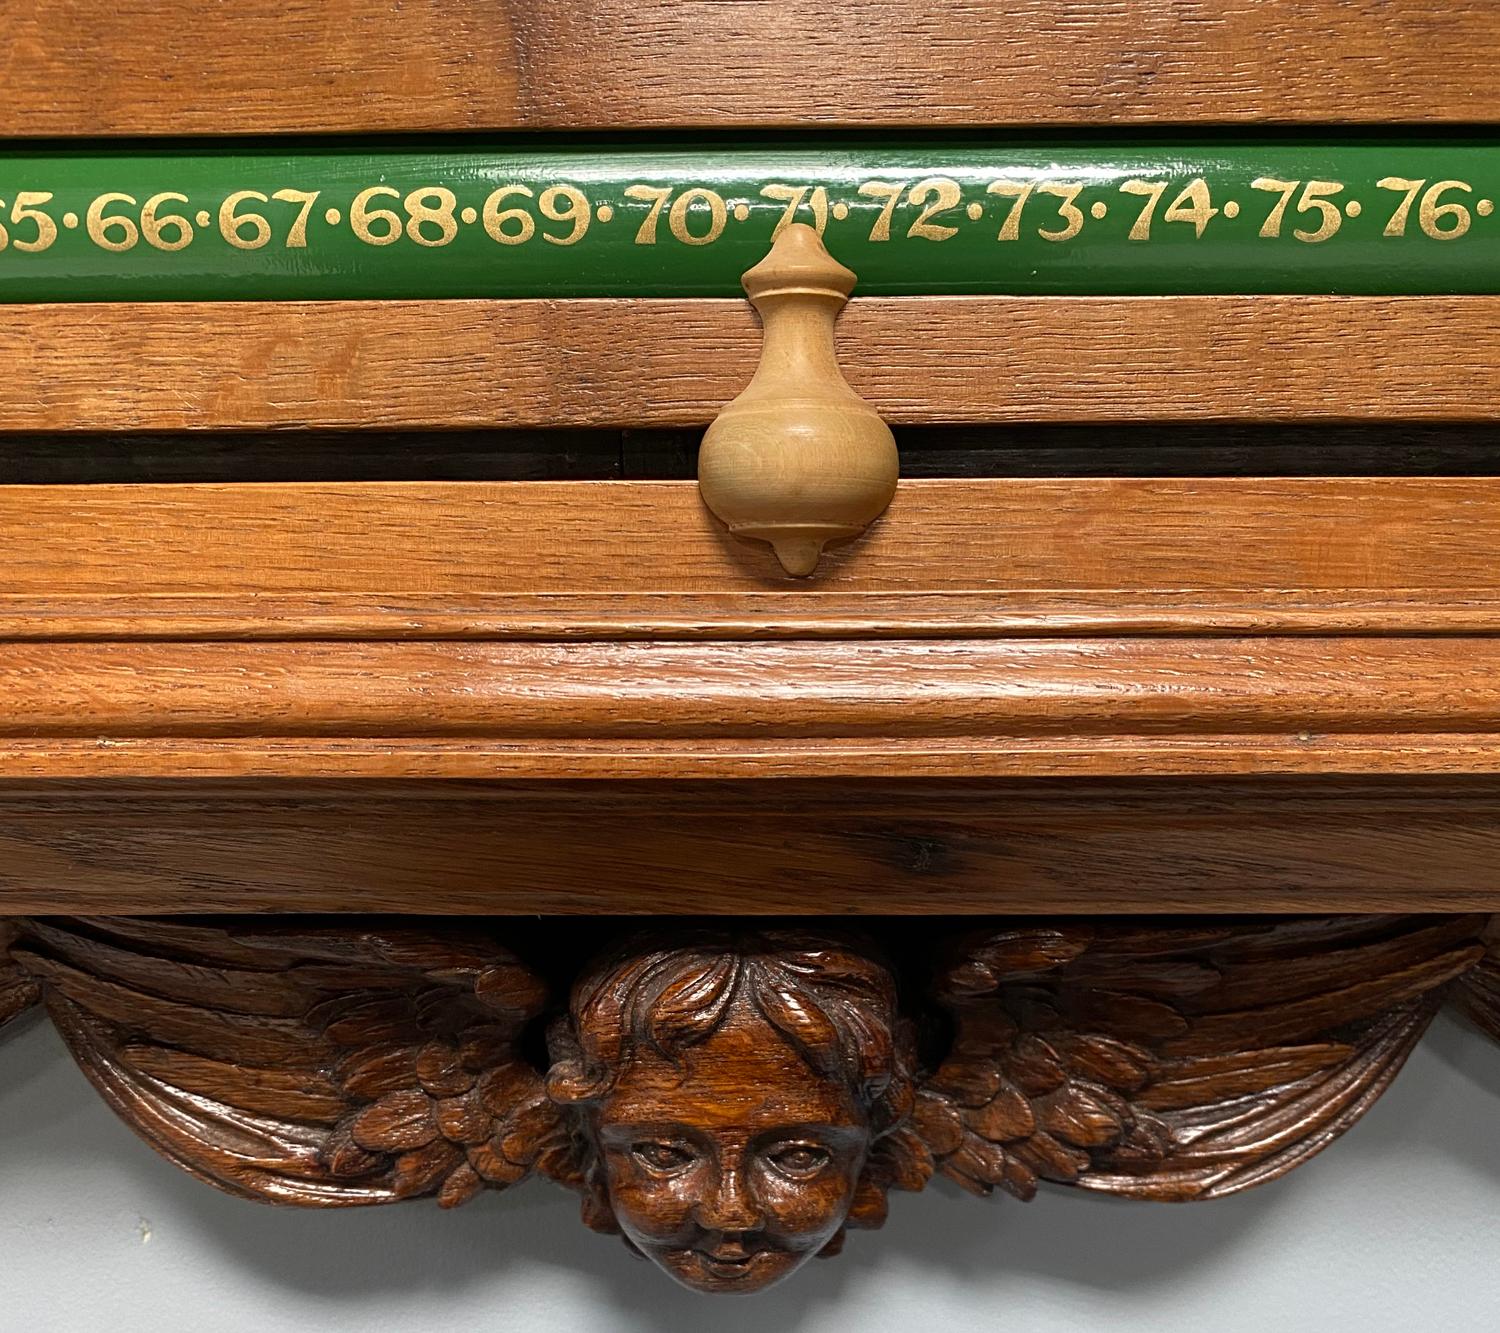 Snooker billiards pool scoring marking board carved oak and decorative detail In Good Condition For Sale In Radstock, GB